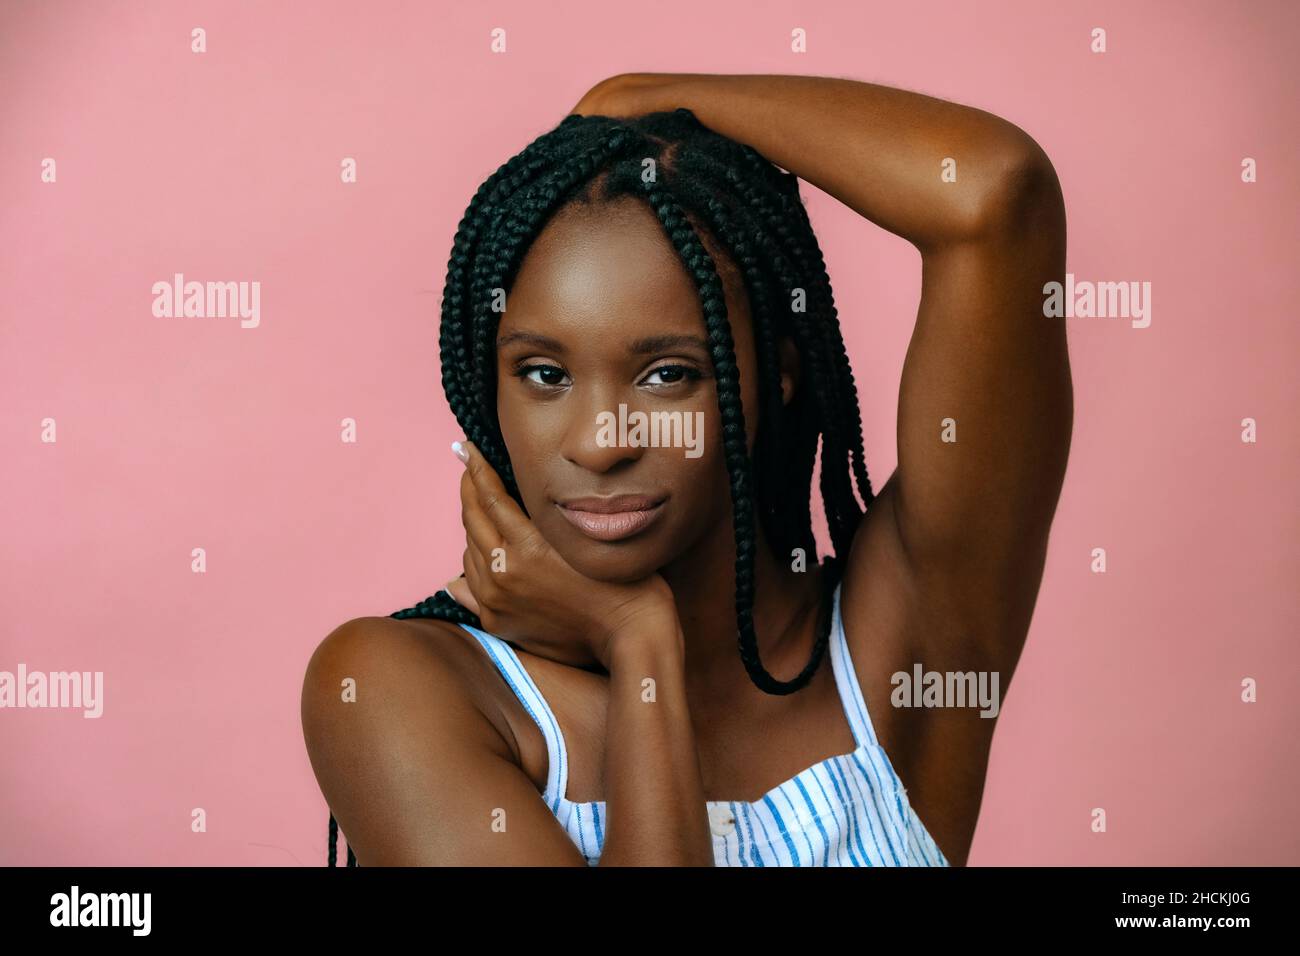 Portrait Of Attractive Young African Model Posing On Pink Background